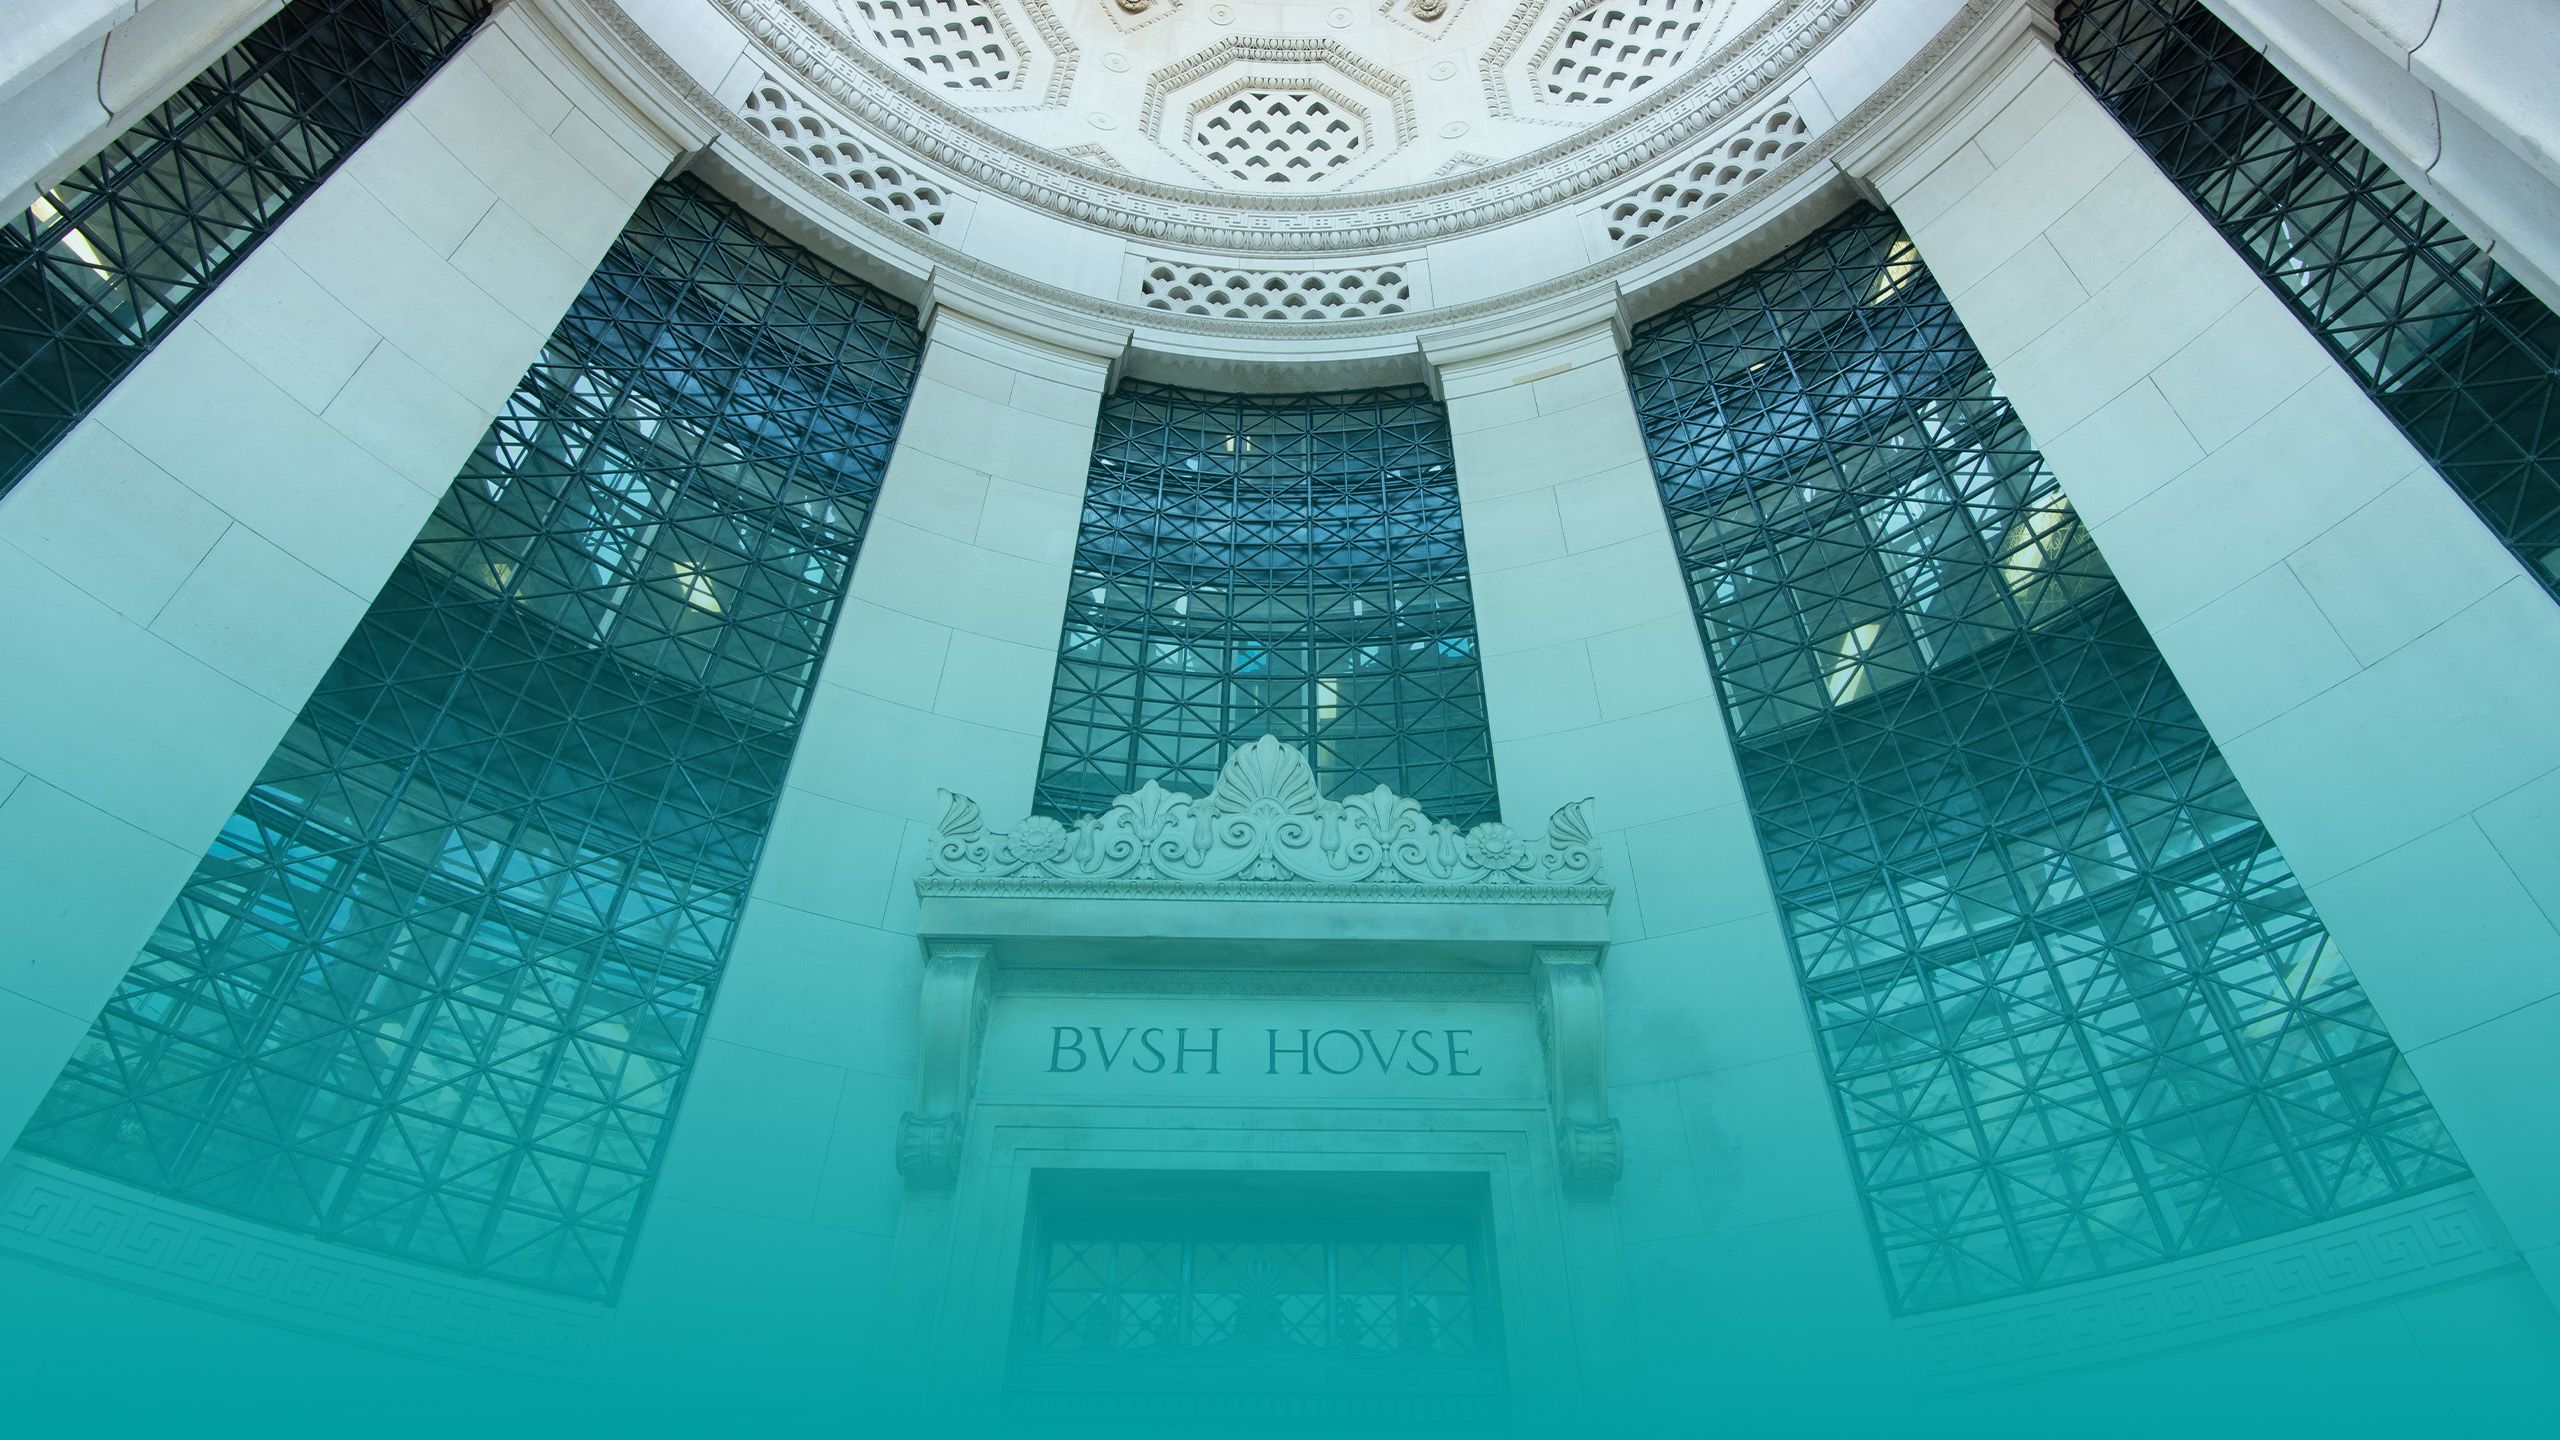 The entrance to Bush House, shot from below.